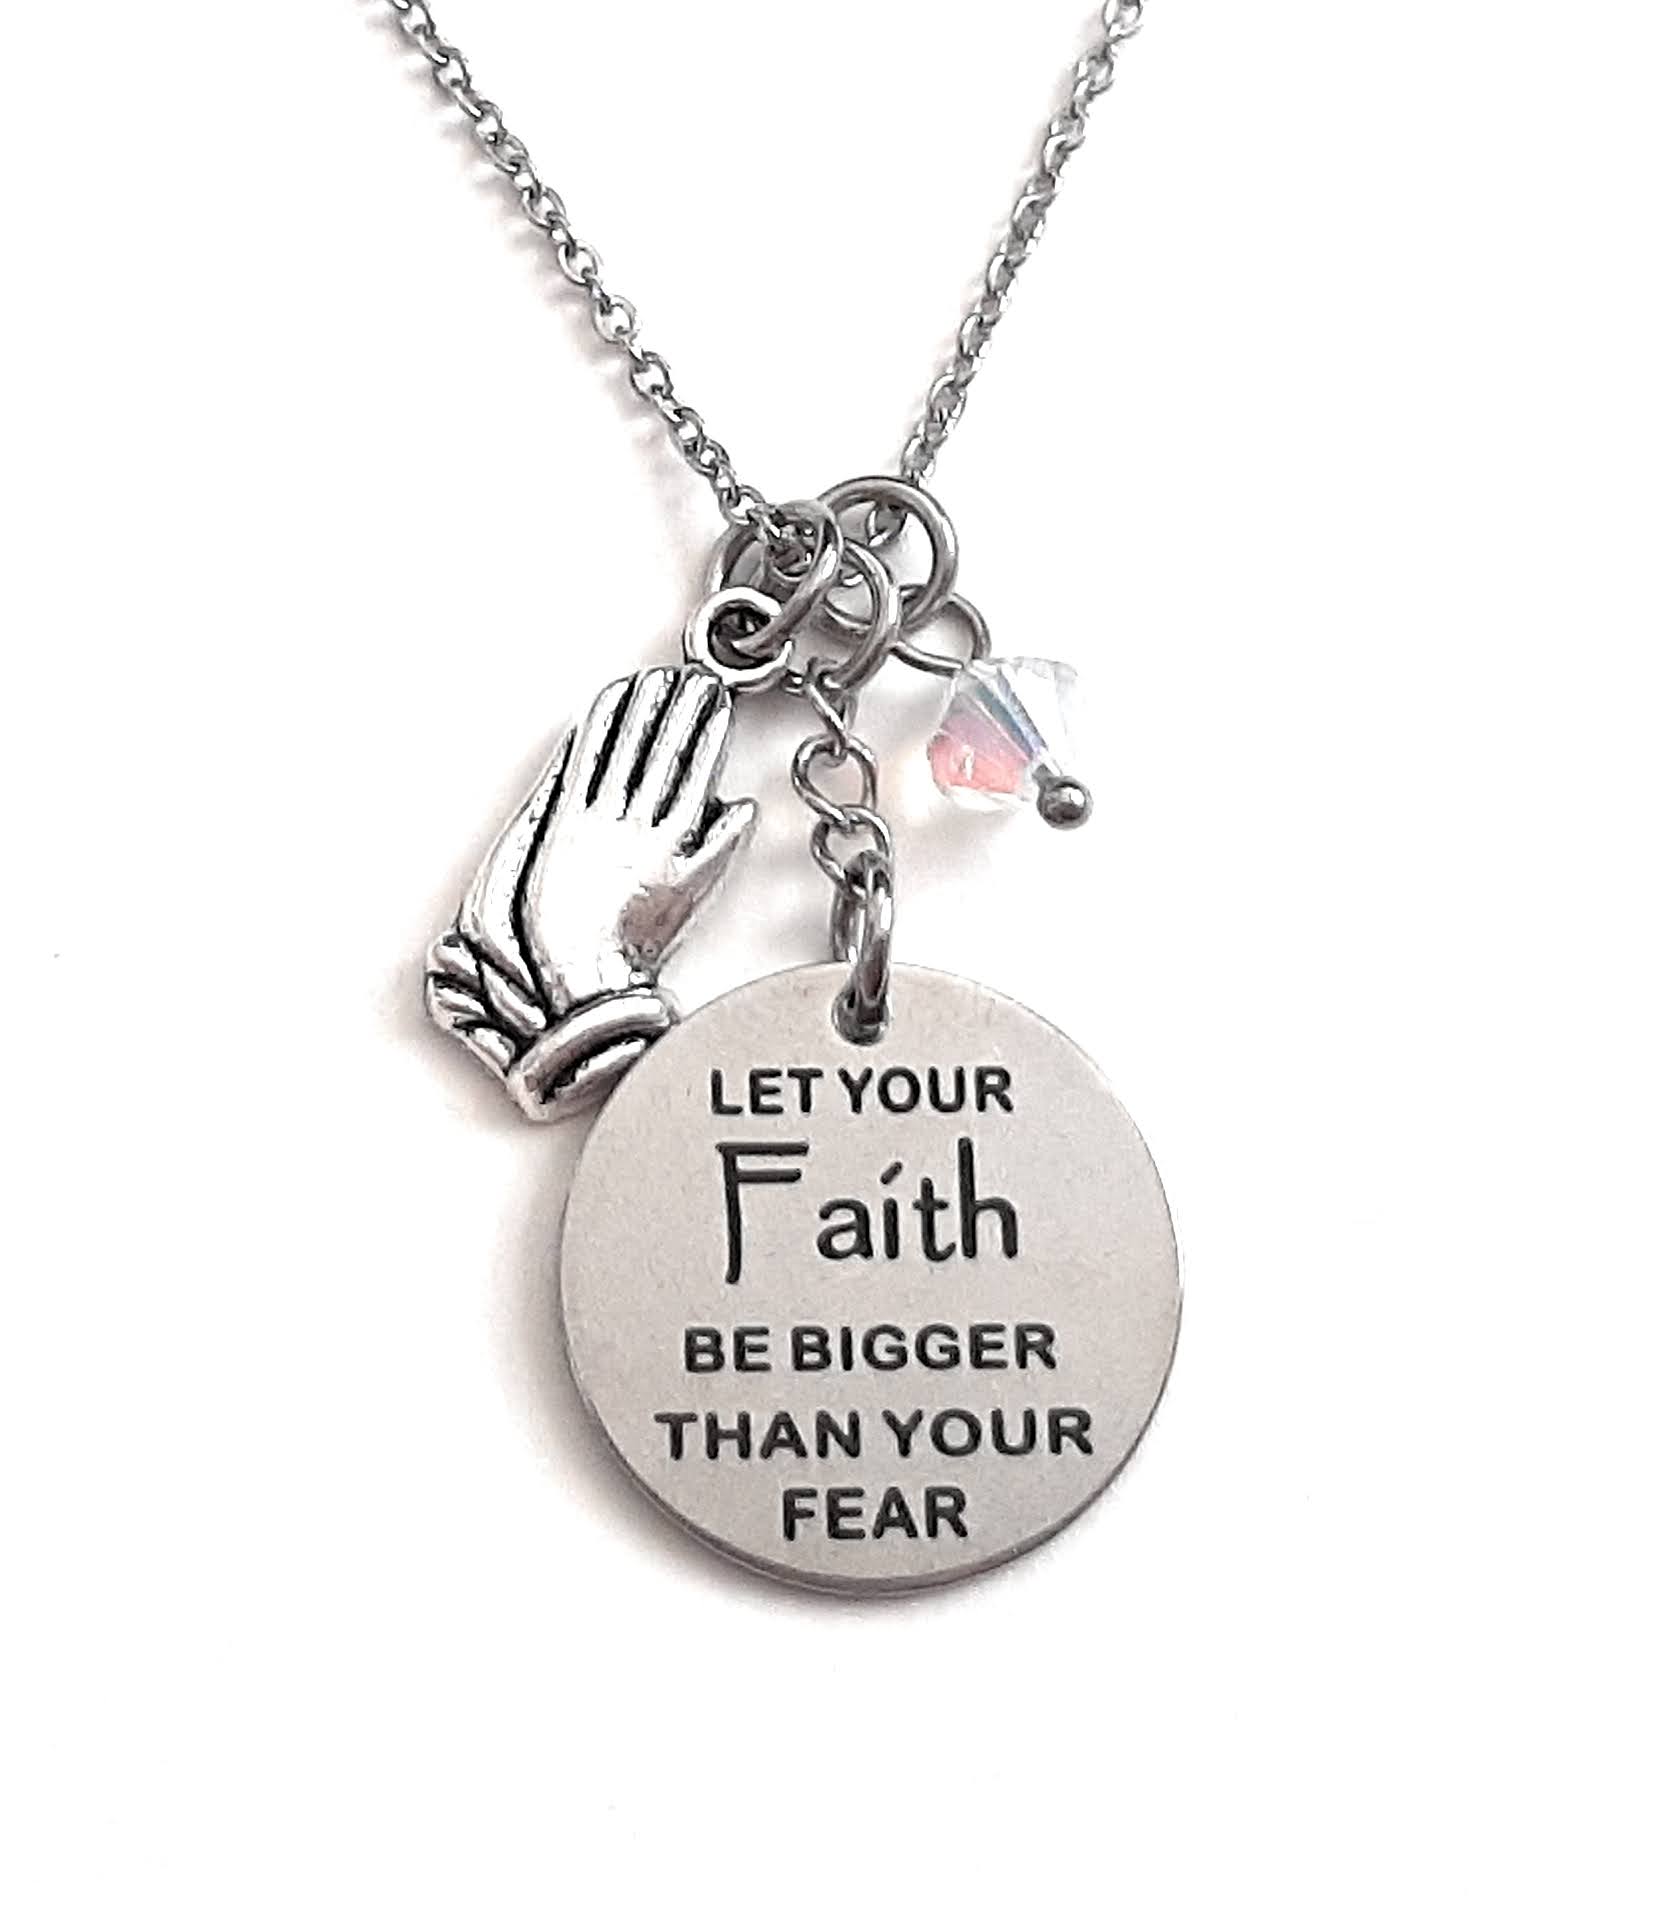 Christian Message Pendant Necklace "Let Your Faith be Bigger than Your Fear" Your Choice of Charm and Birthstone Color